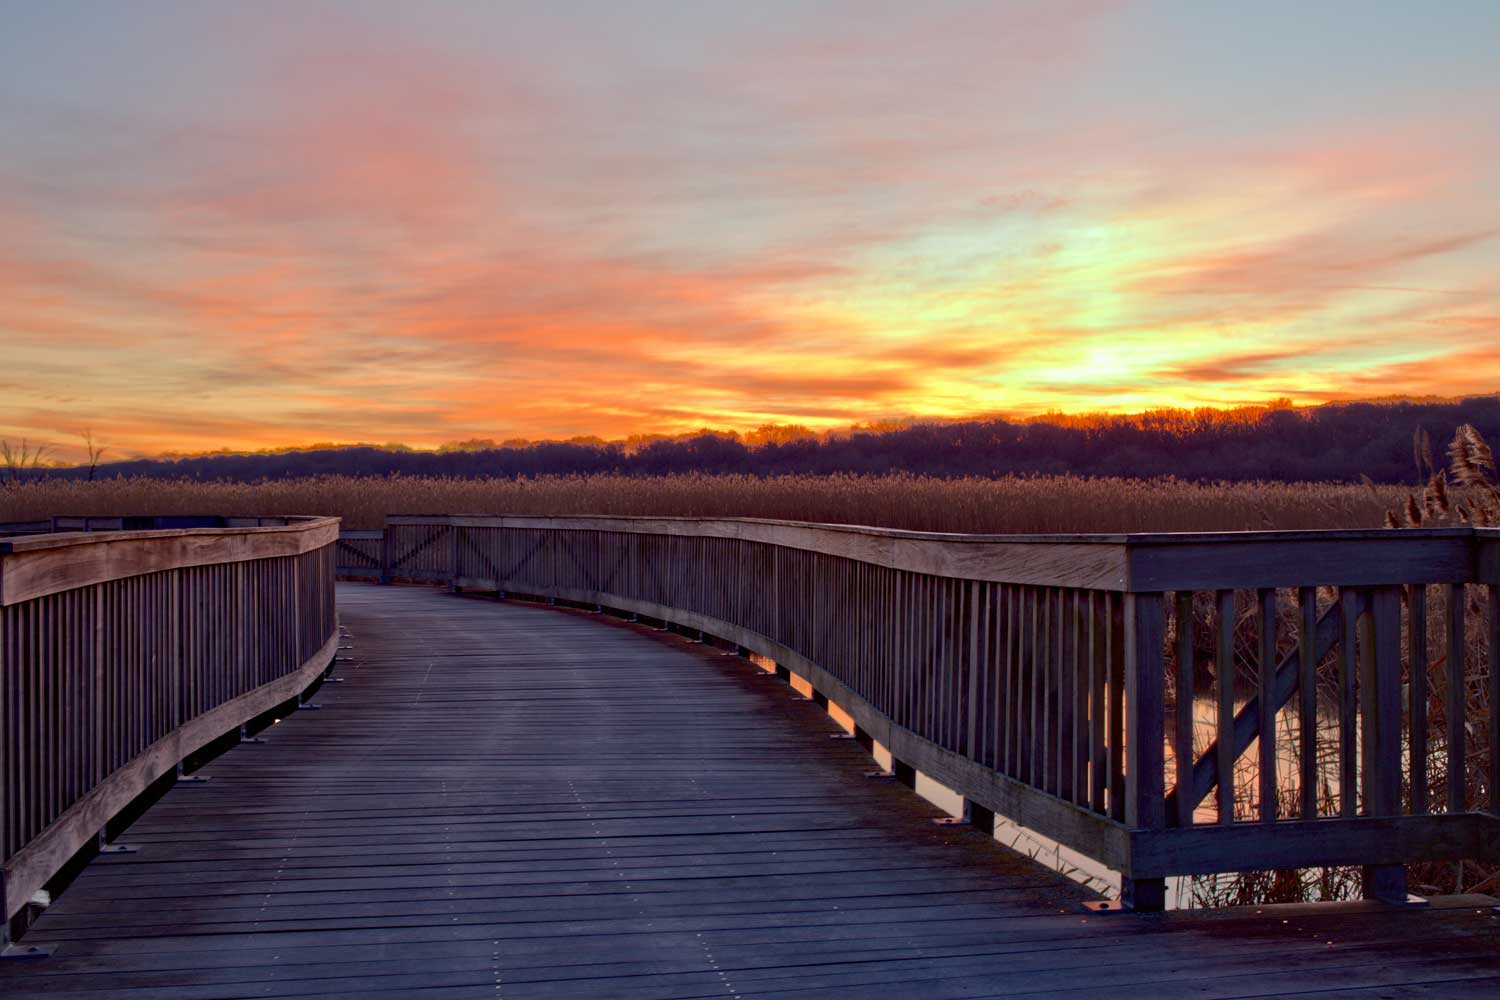 The sun setting behind trees and dried grasses with a long wooden bridge in the foreground.